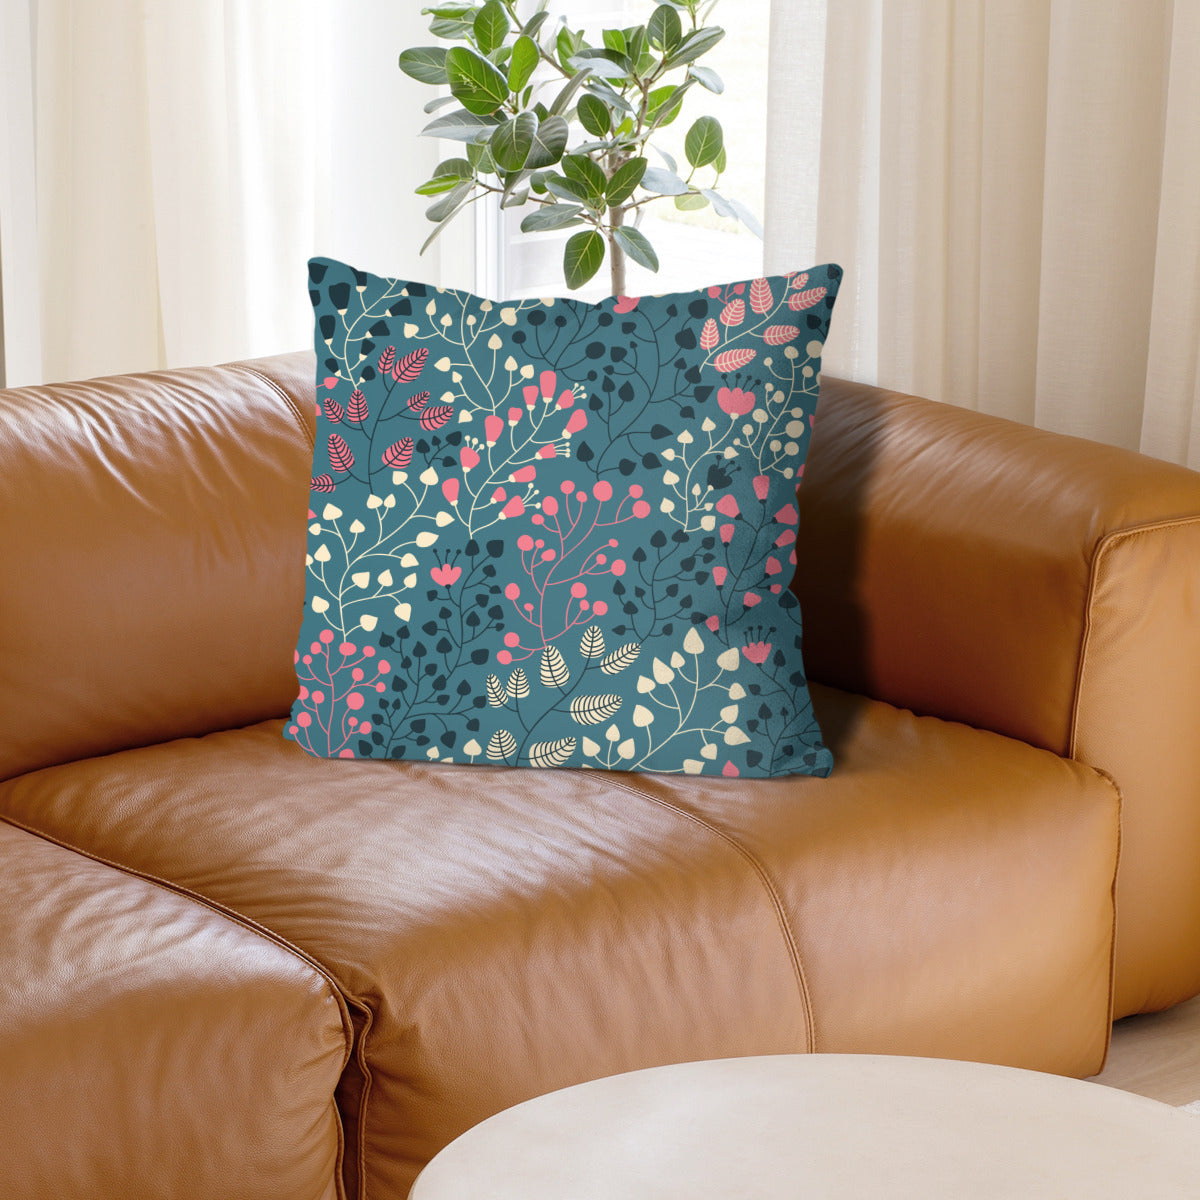 Throw pillow - green, pink and yellow design